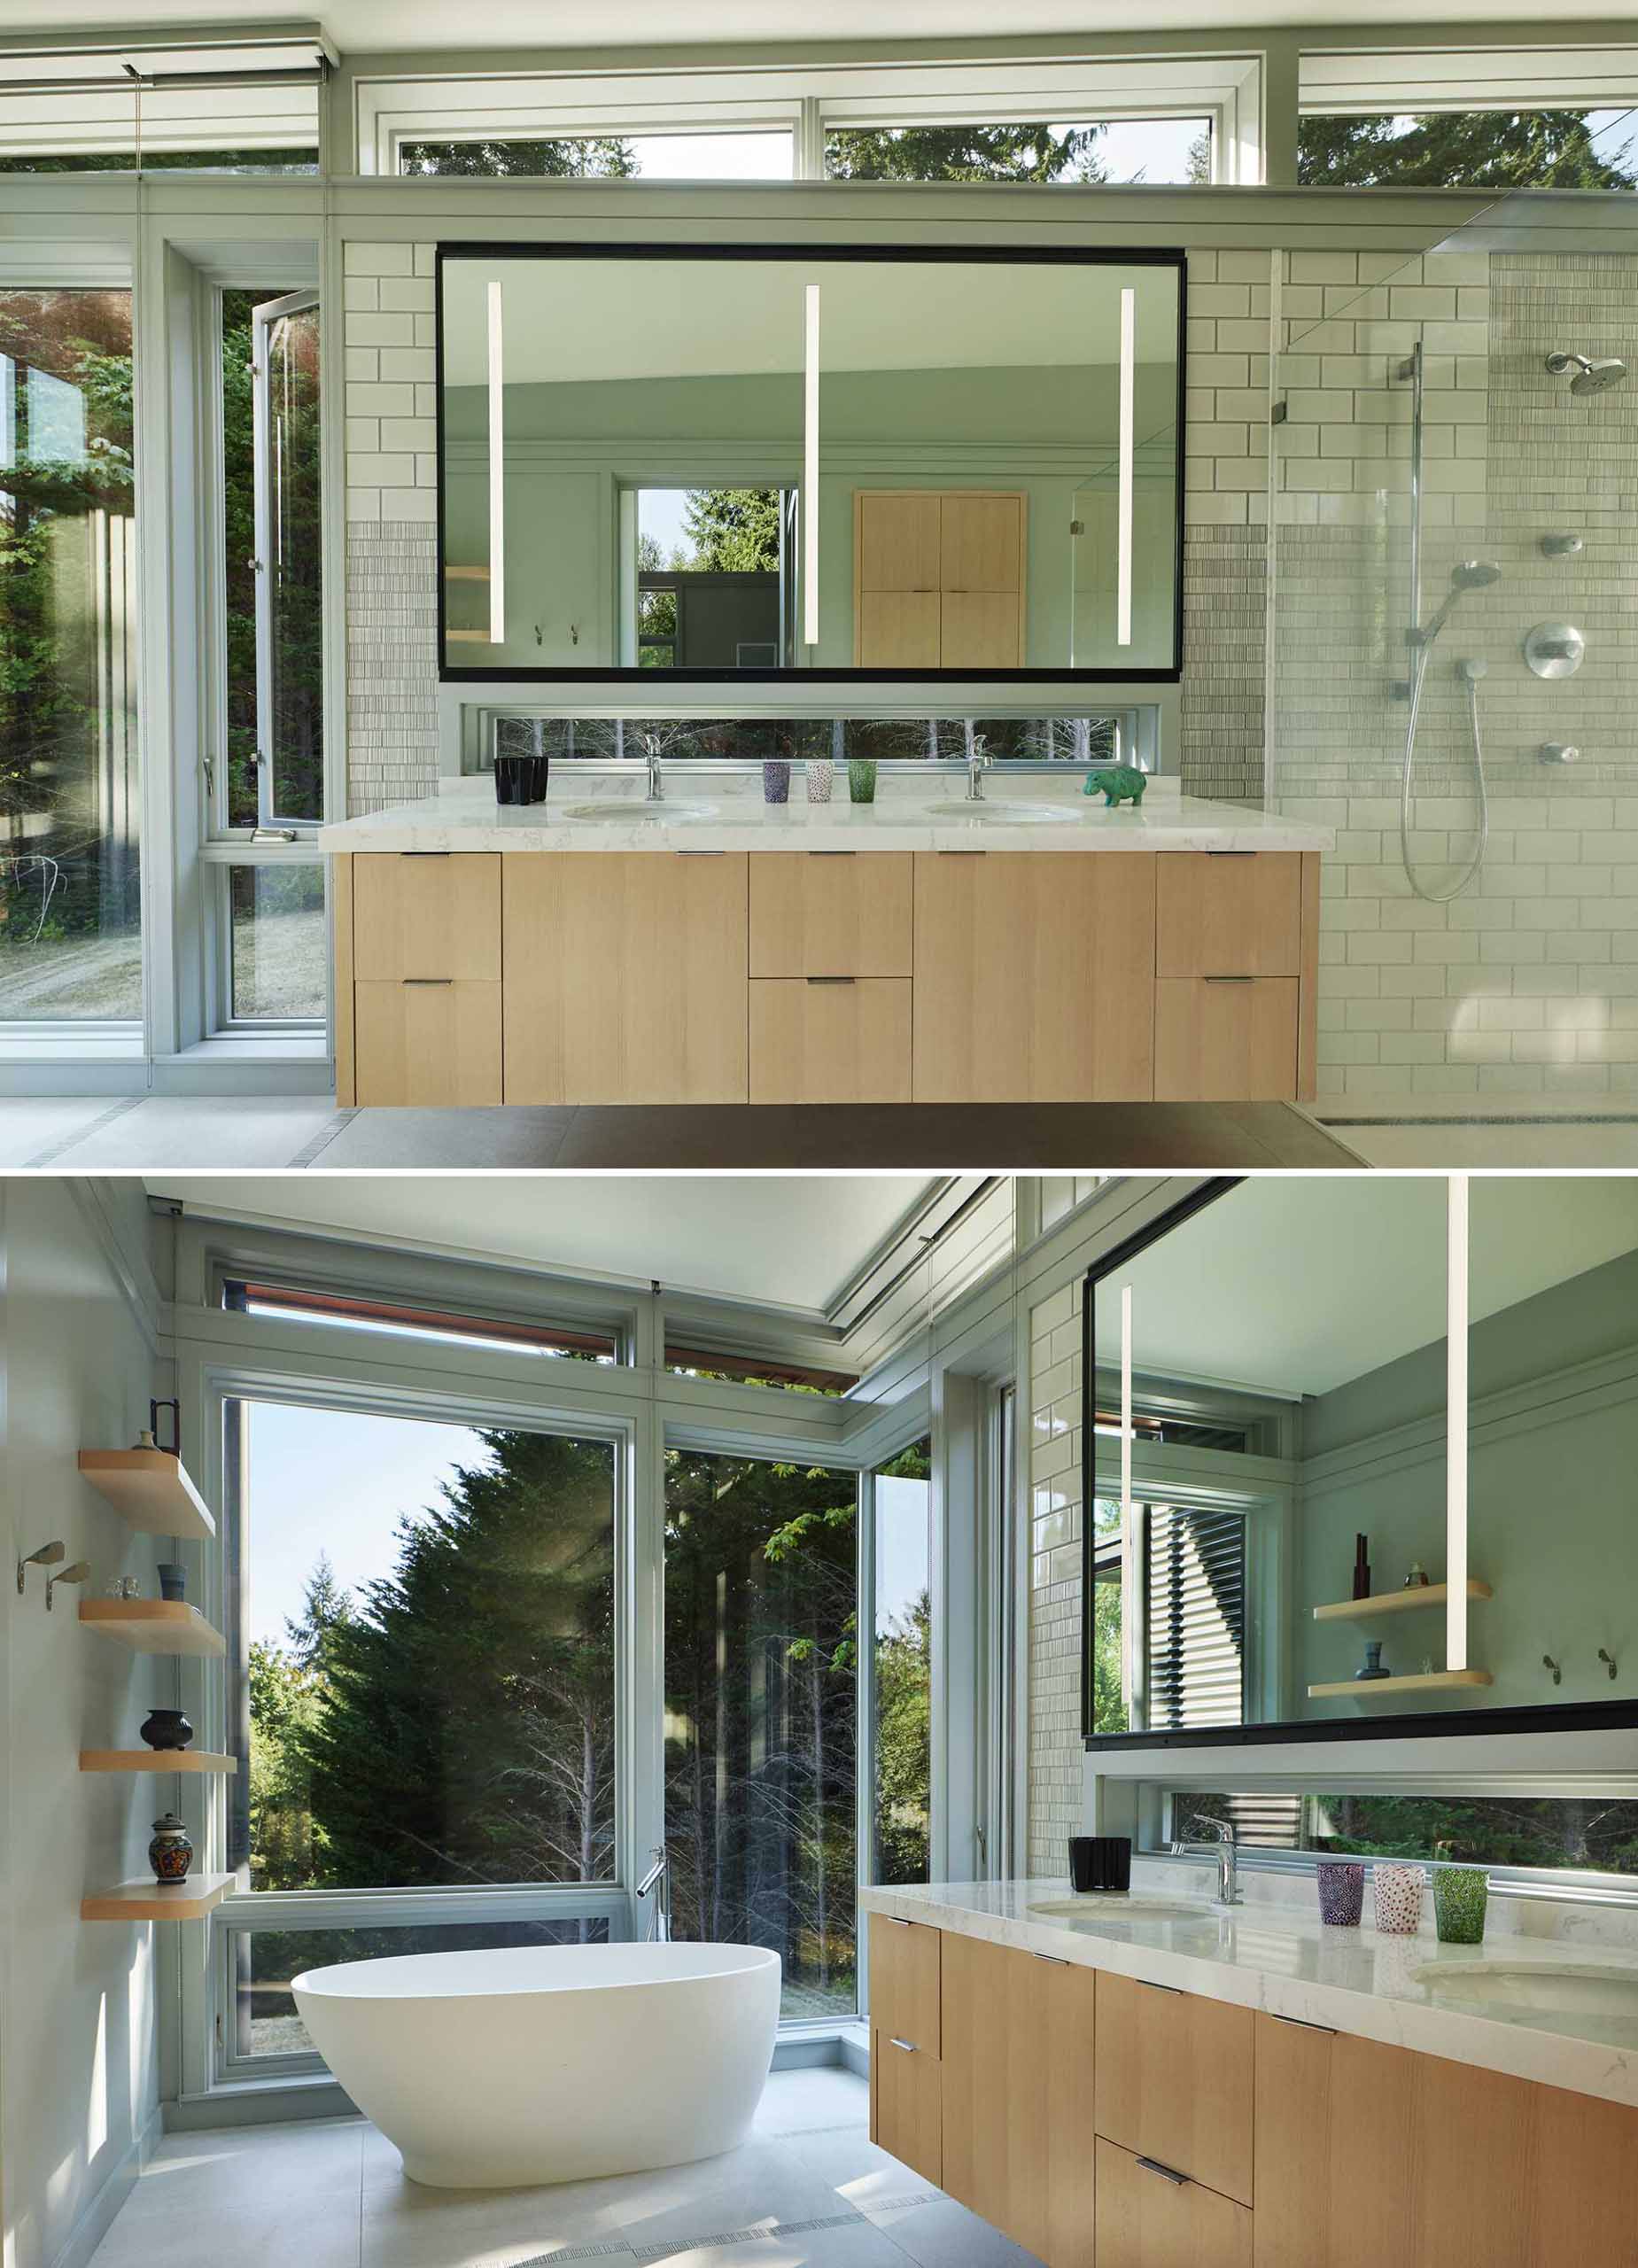 In this modern bathroom, clerestory windows wrap around the room, while the shower is located to the right of the vanity, and the bathtub has been positioned by the floor-to-ceiling windows.